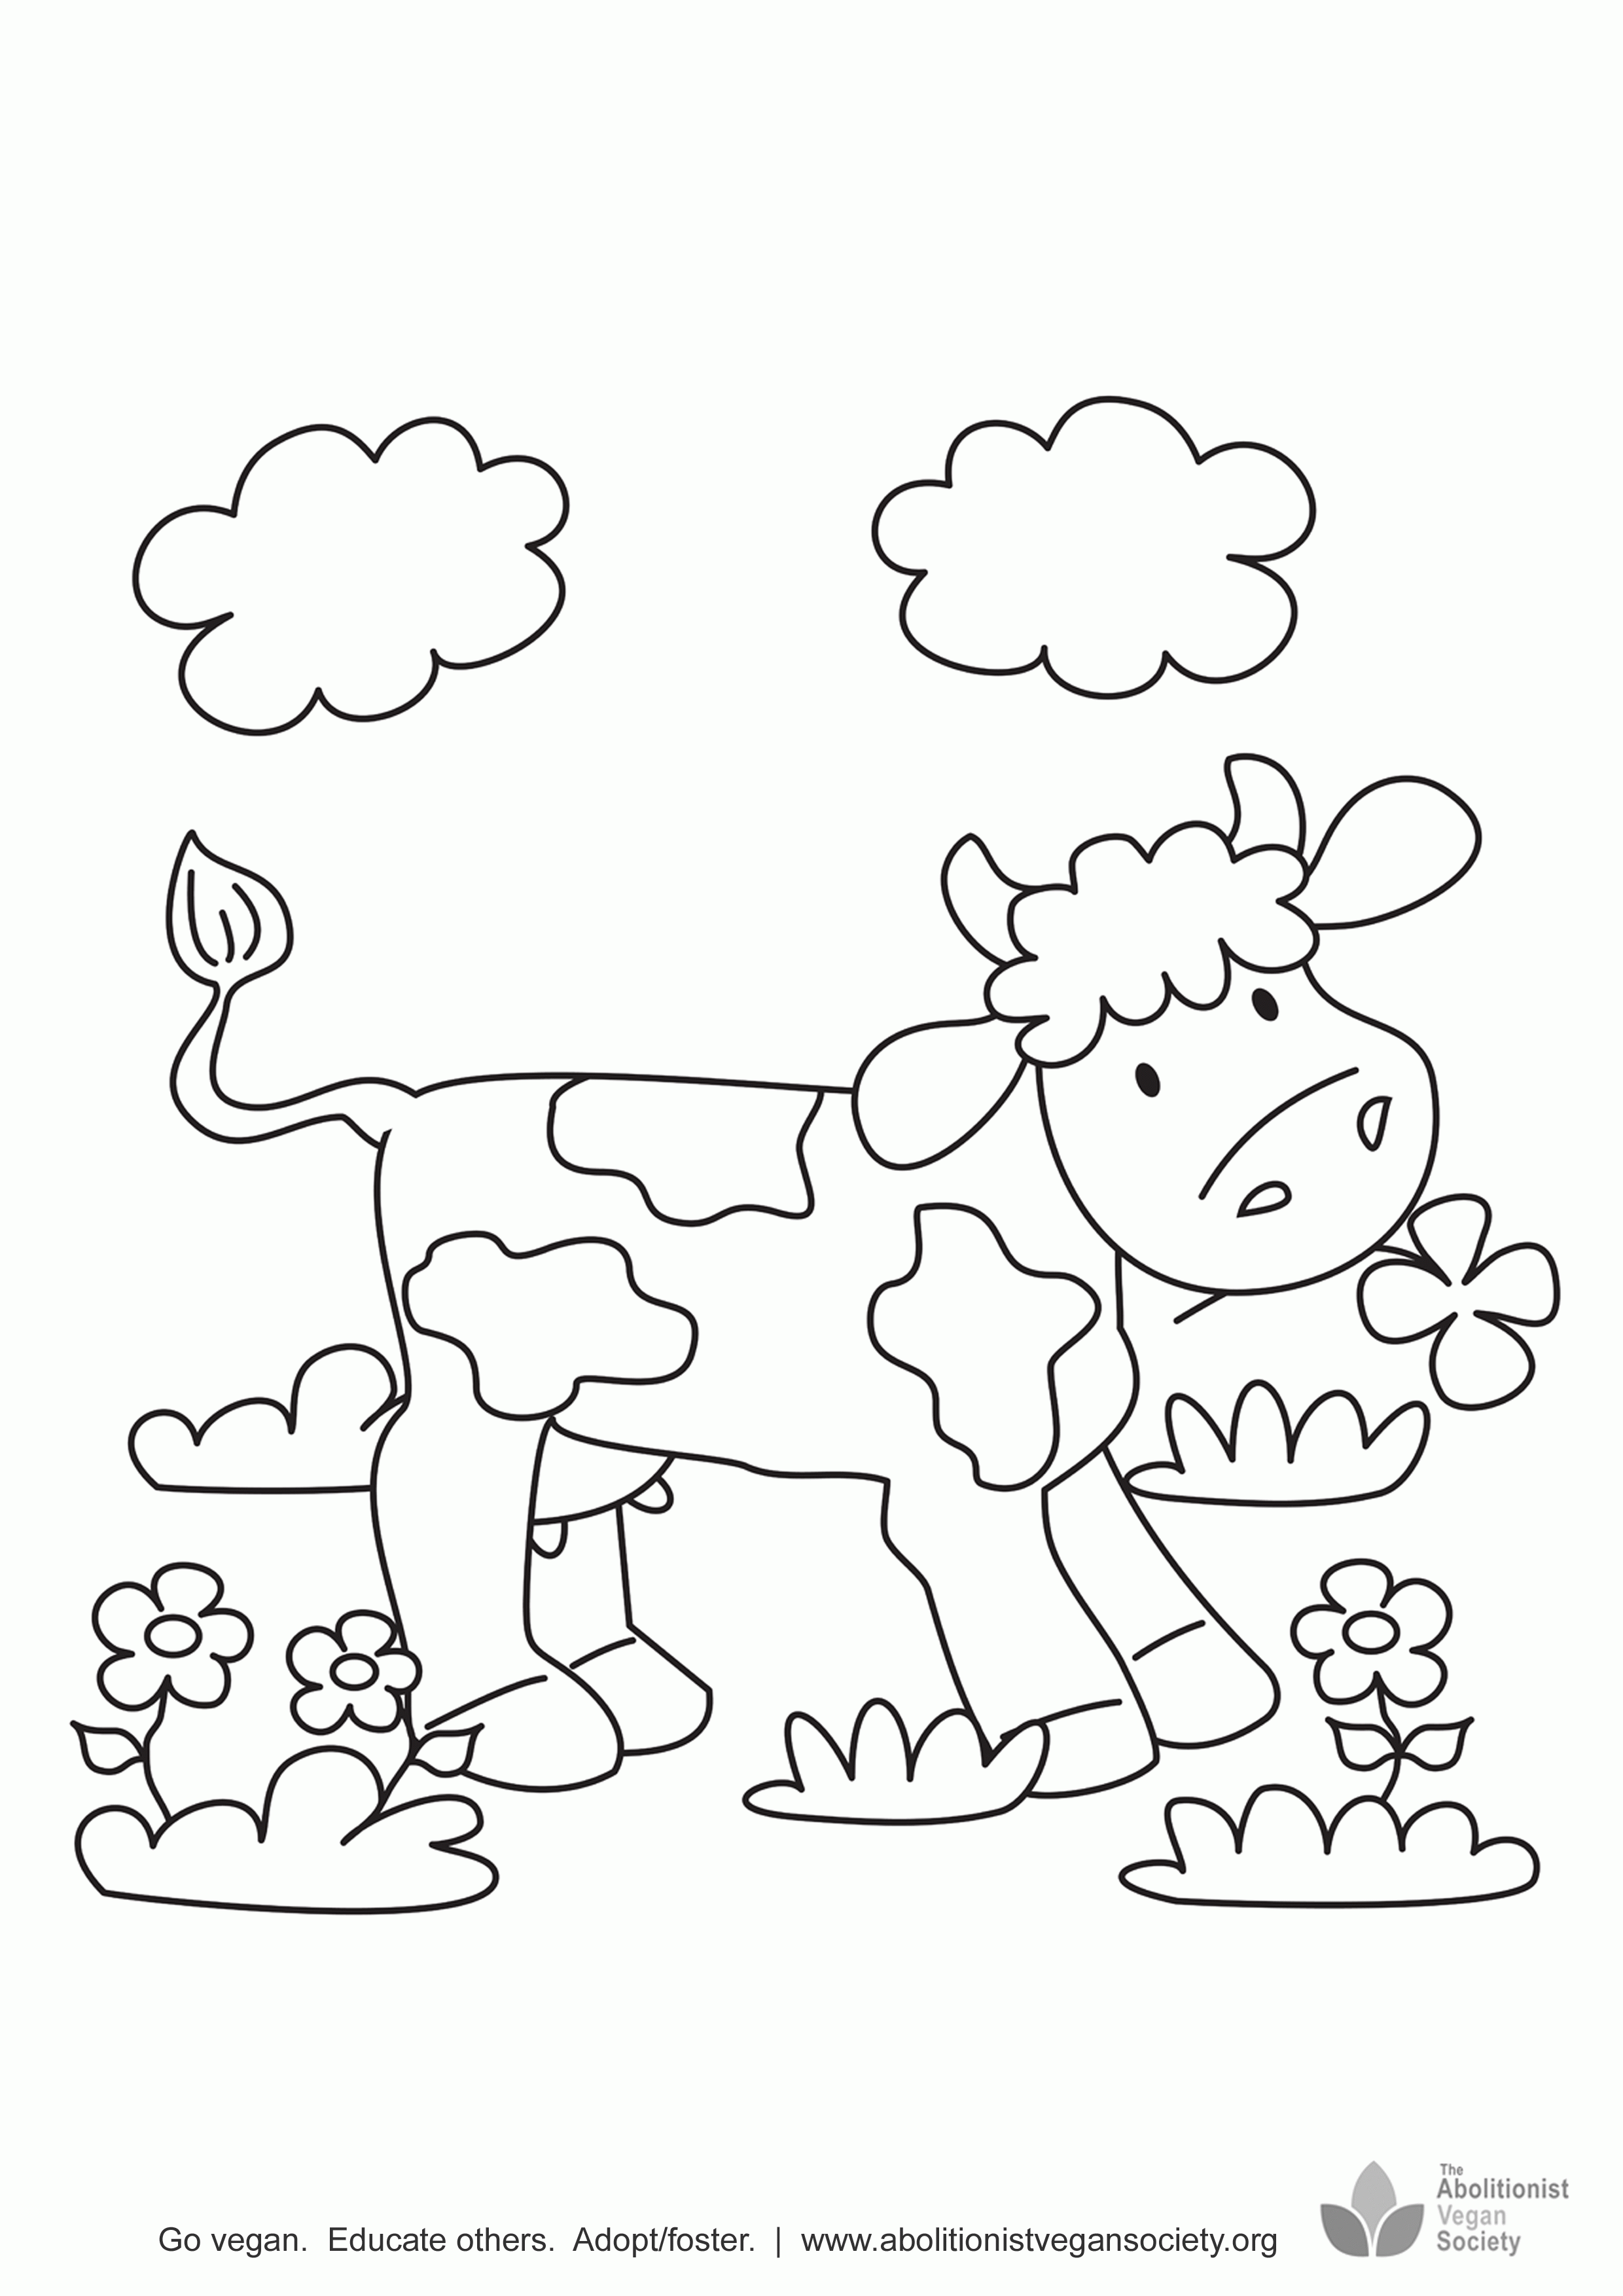 A4 Size Colouring Pages